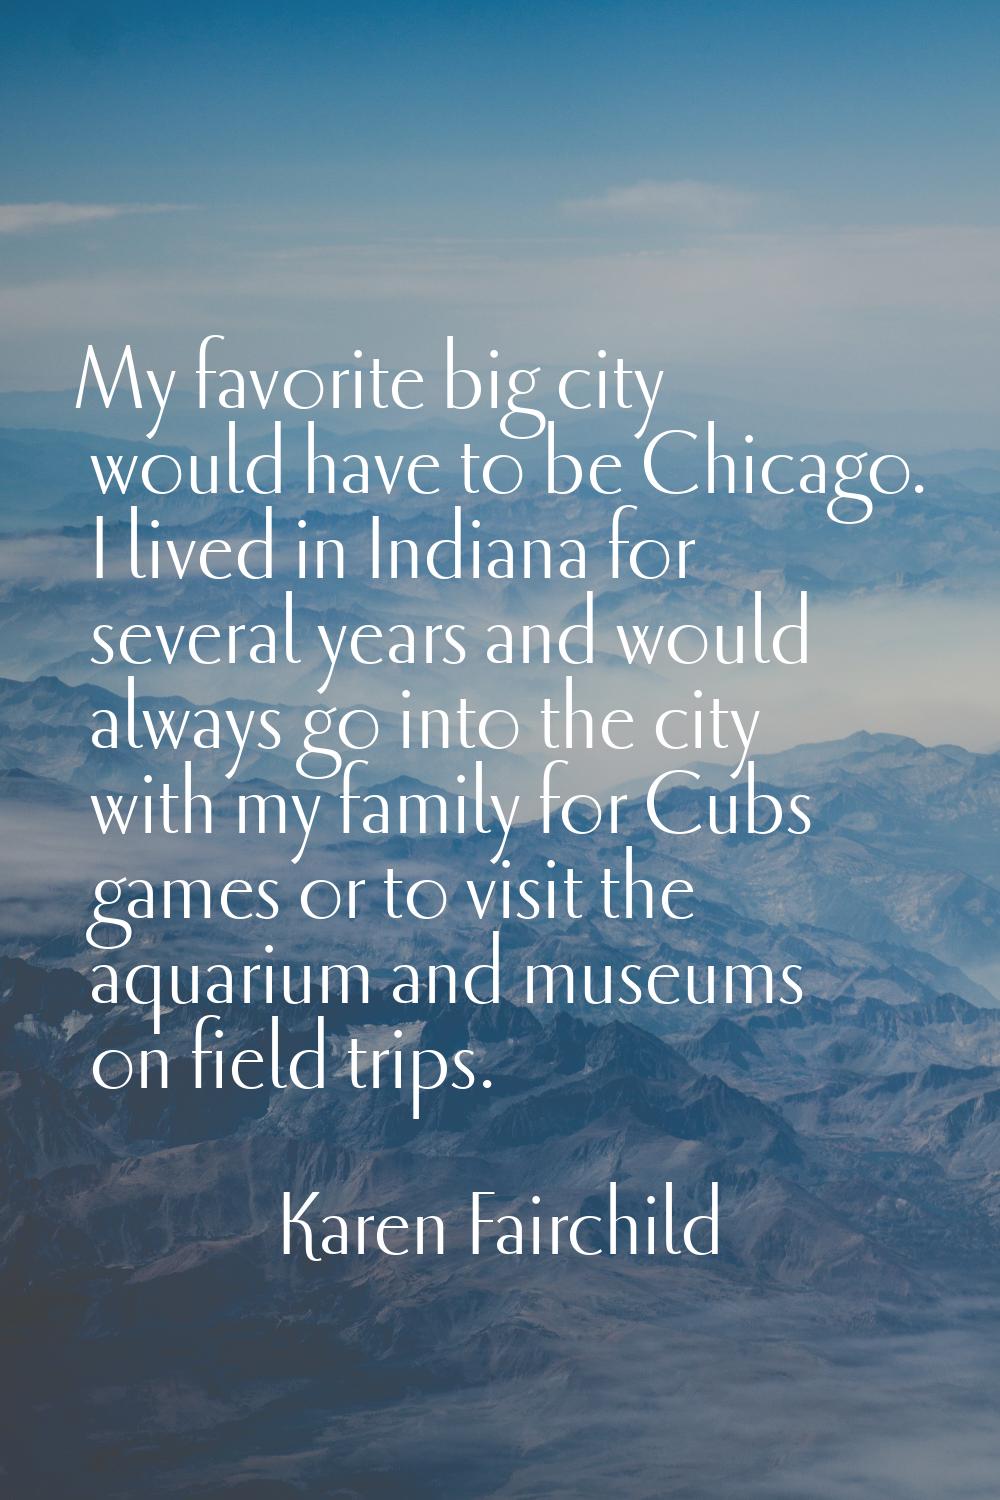 My favorite big city would have to be Chicago. I lived in Indiana for several years and would alway